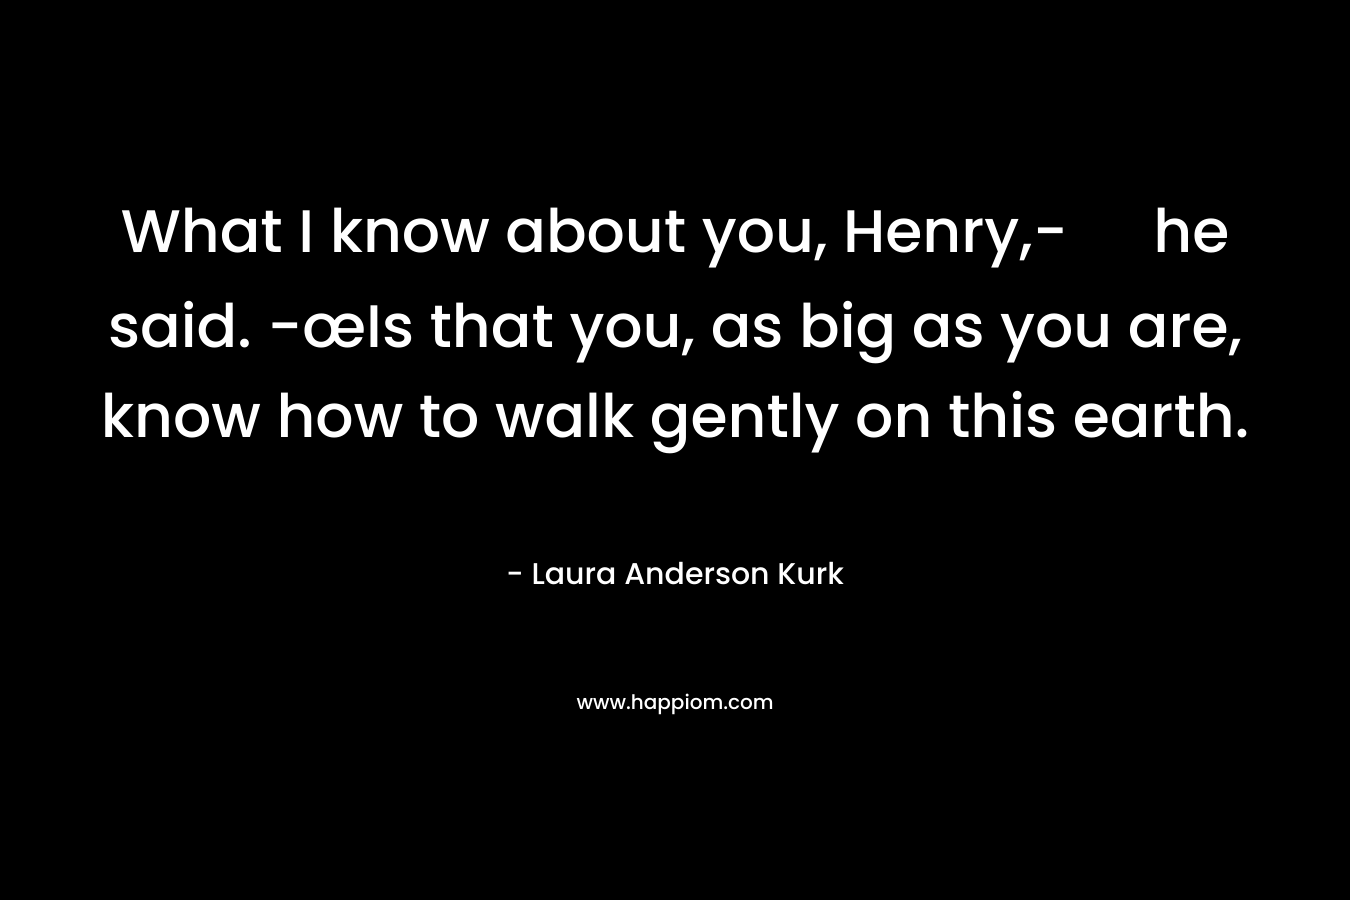 What I know about you, Henry,- he said. -œIs that you, as big as you are, know how to walk gently on this earth. – Laura Anderson Kurk